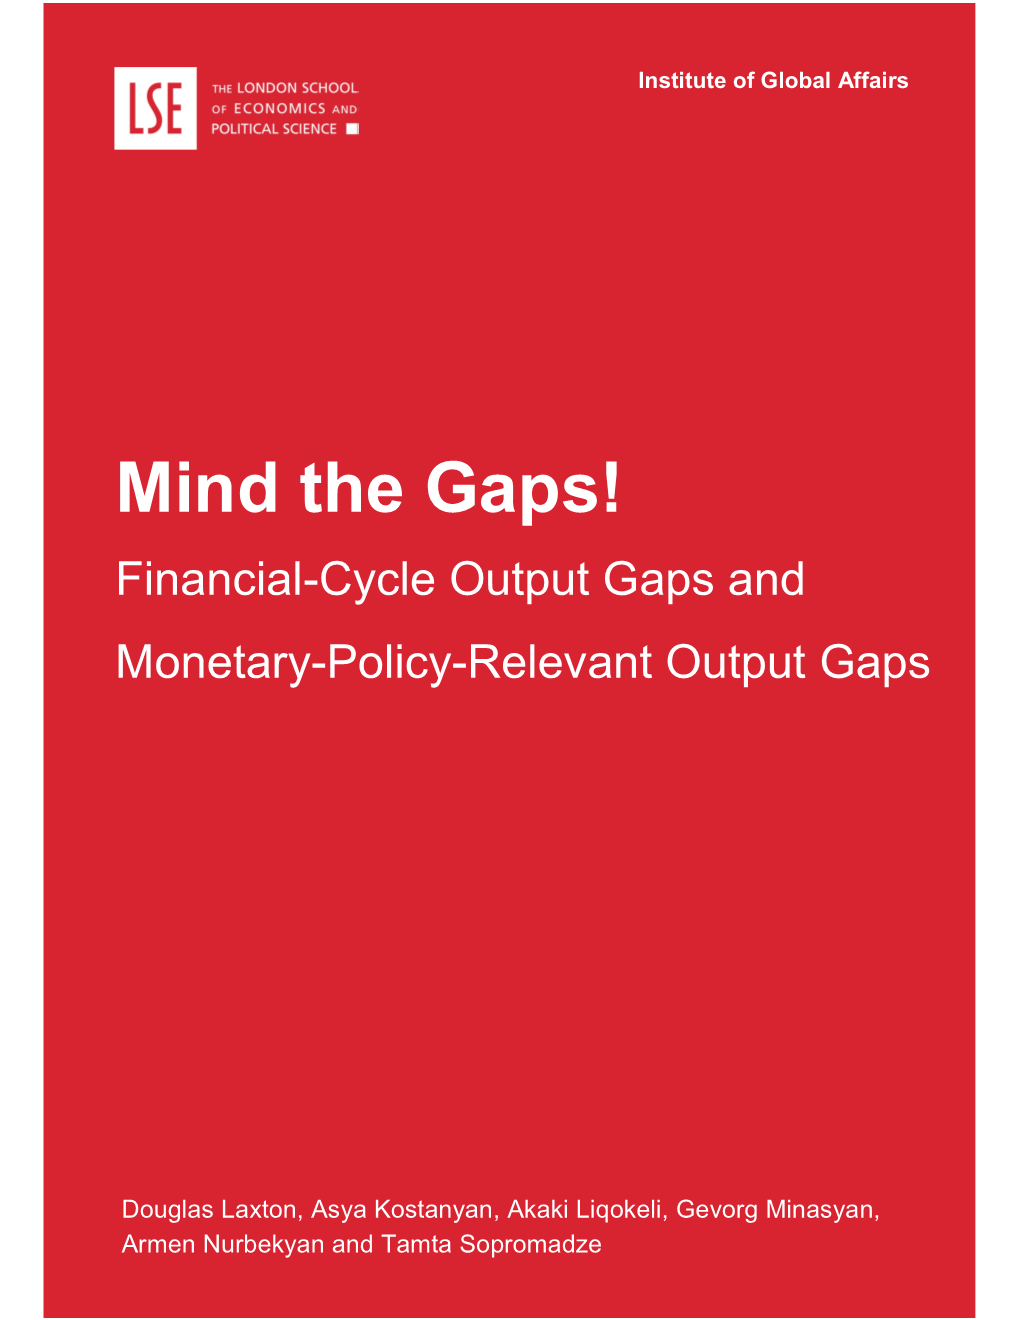 Mind the Gaps! Financial-Cycle Output Gaps and Monetary-Policy-Relevant Output Gaps1 2